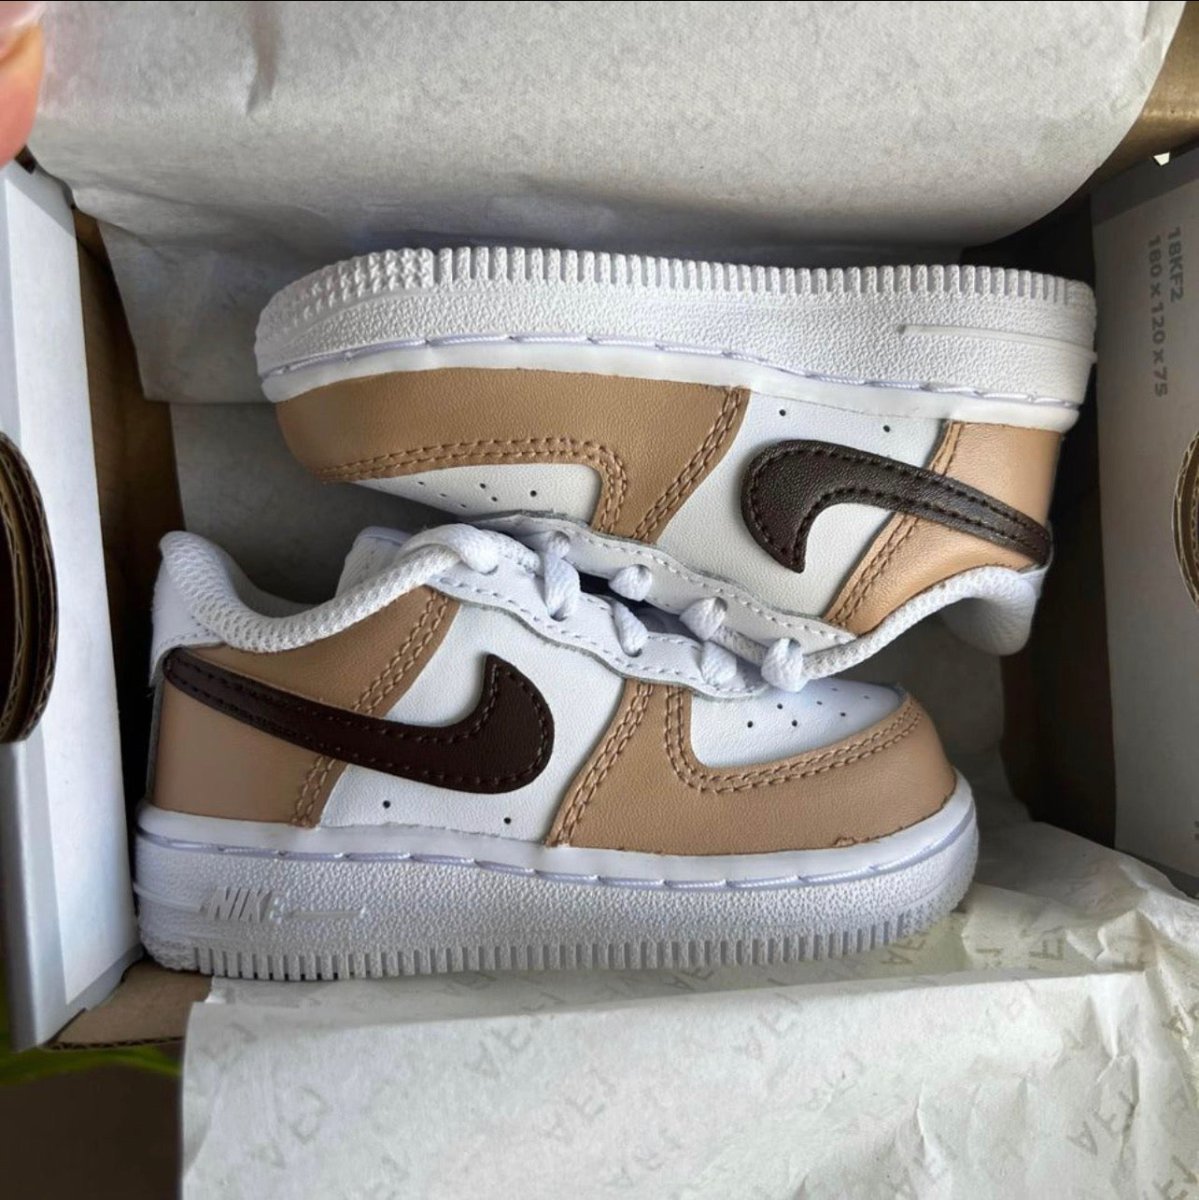 Brown Beige Customized Nike Air Force 1 Can Be Customized 